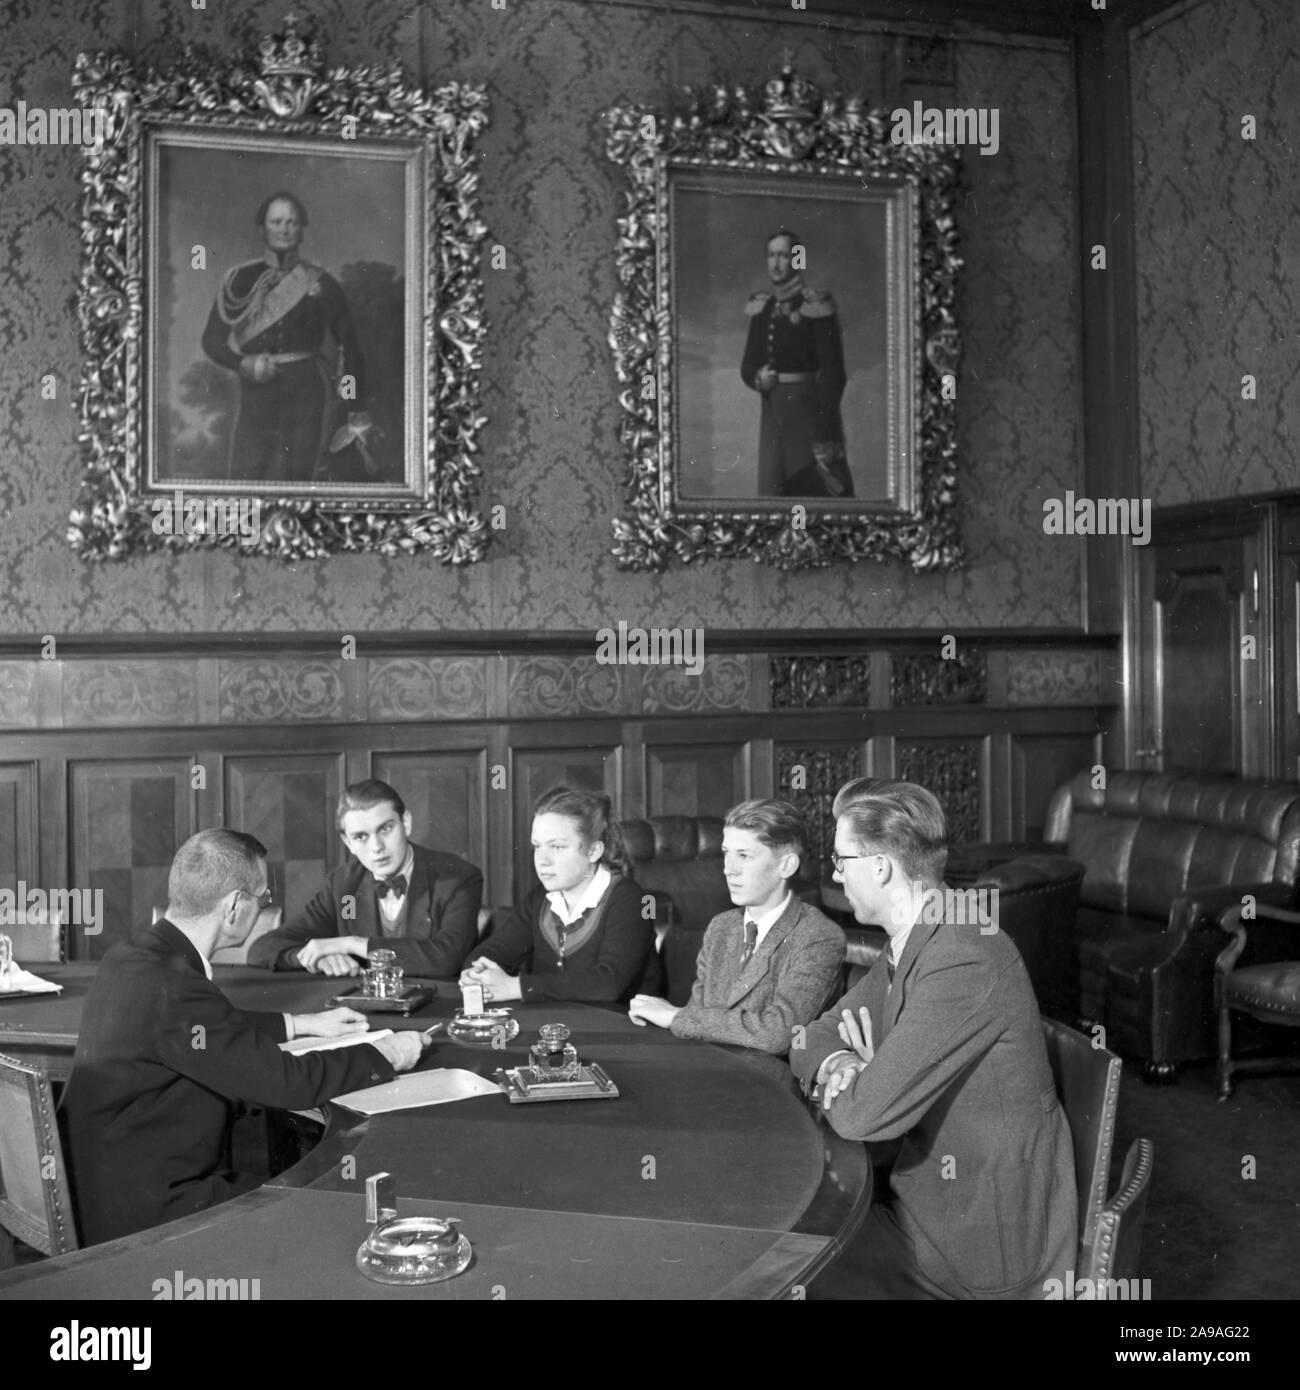 Apprentices doing their final oral exam at the end of their apprenticeship in a bank, Germany 1940s. Stock Photo